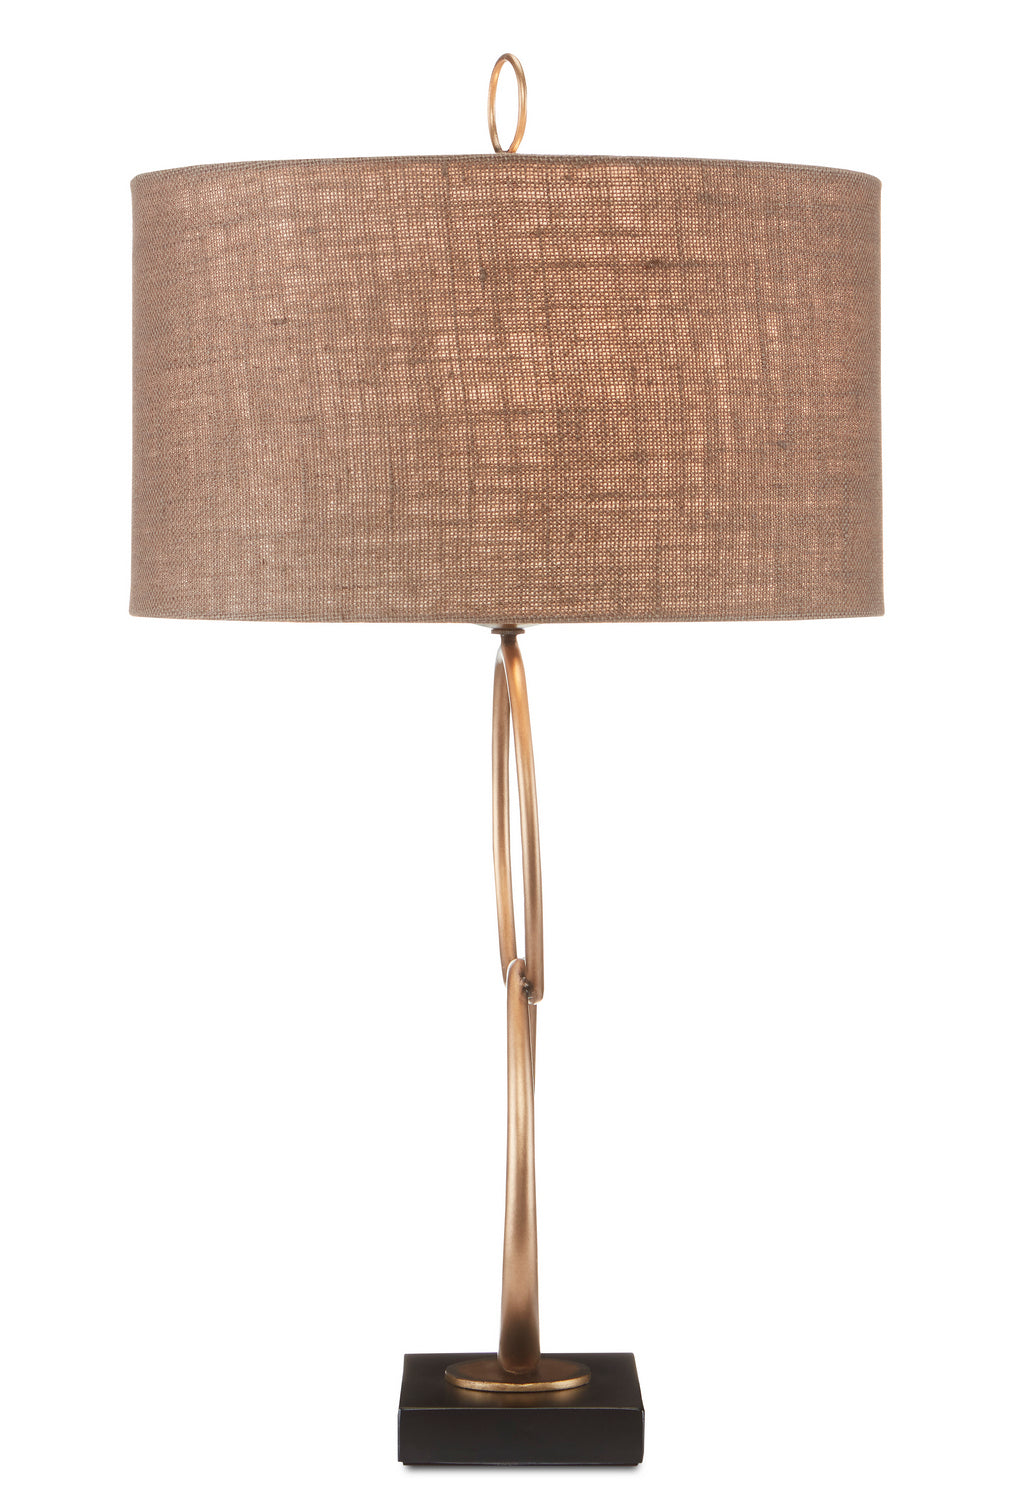 One Light Table Lamp from the Shelley collection in Antique Brass/Black finish